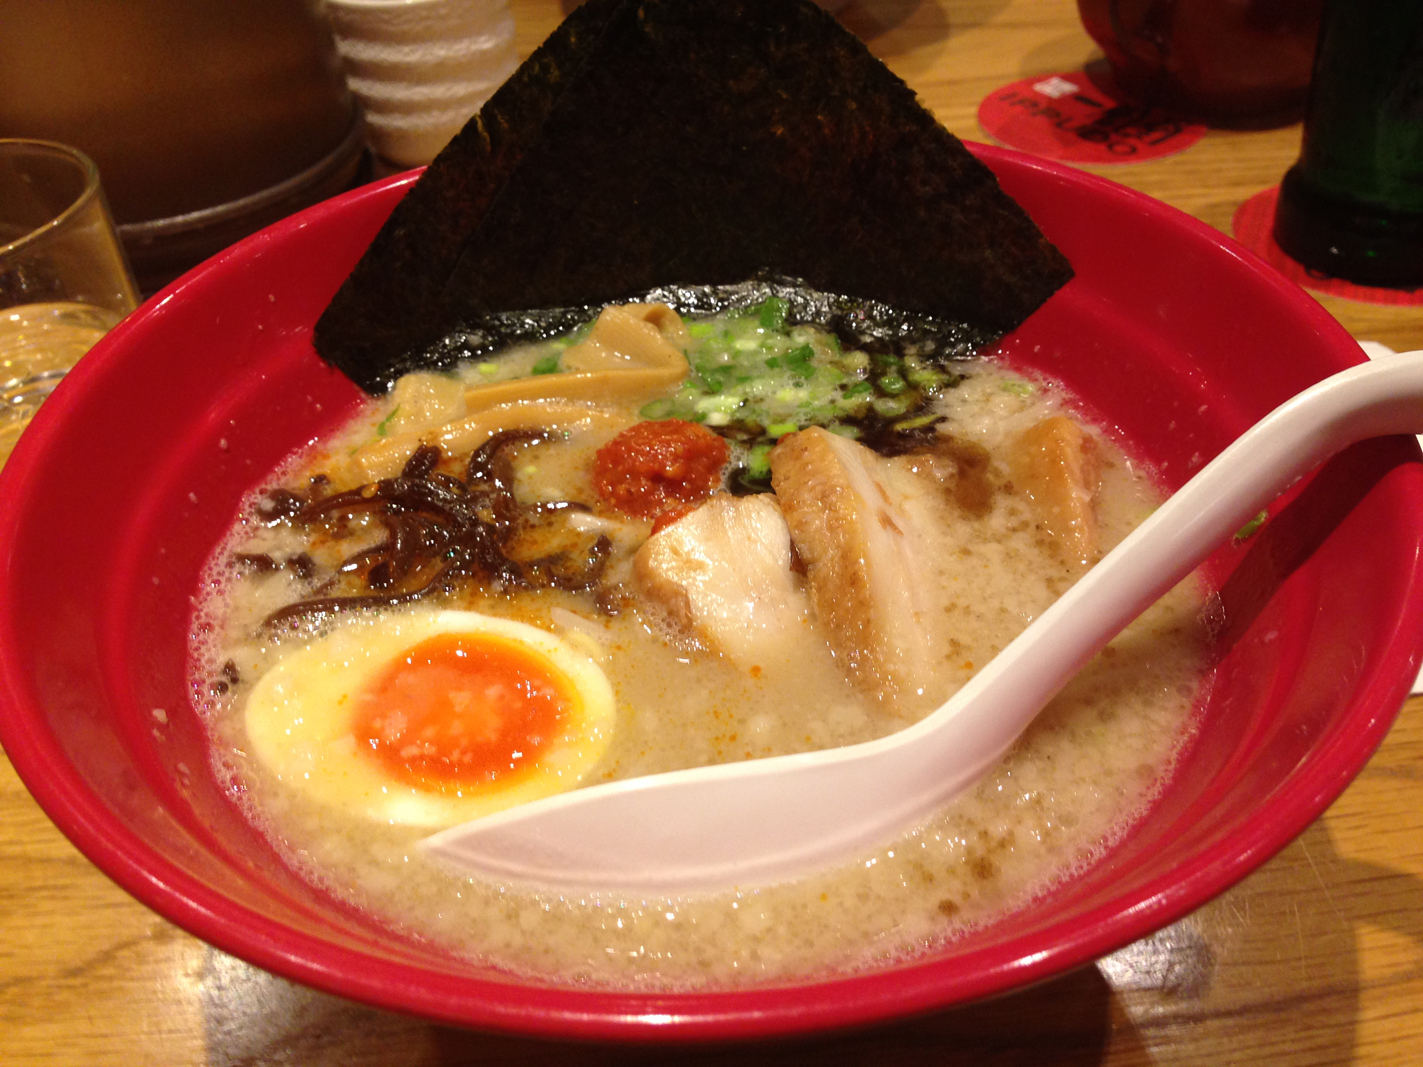 And of course, how could I not have a picture of Ippudo's delicious ramen. Just looking at it is making me want it again... Ahh!